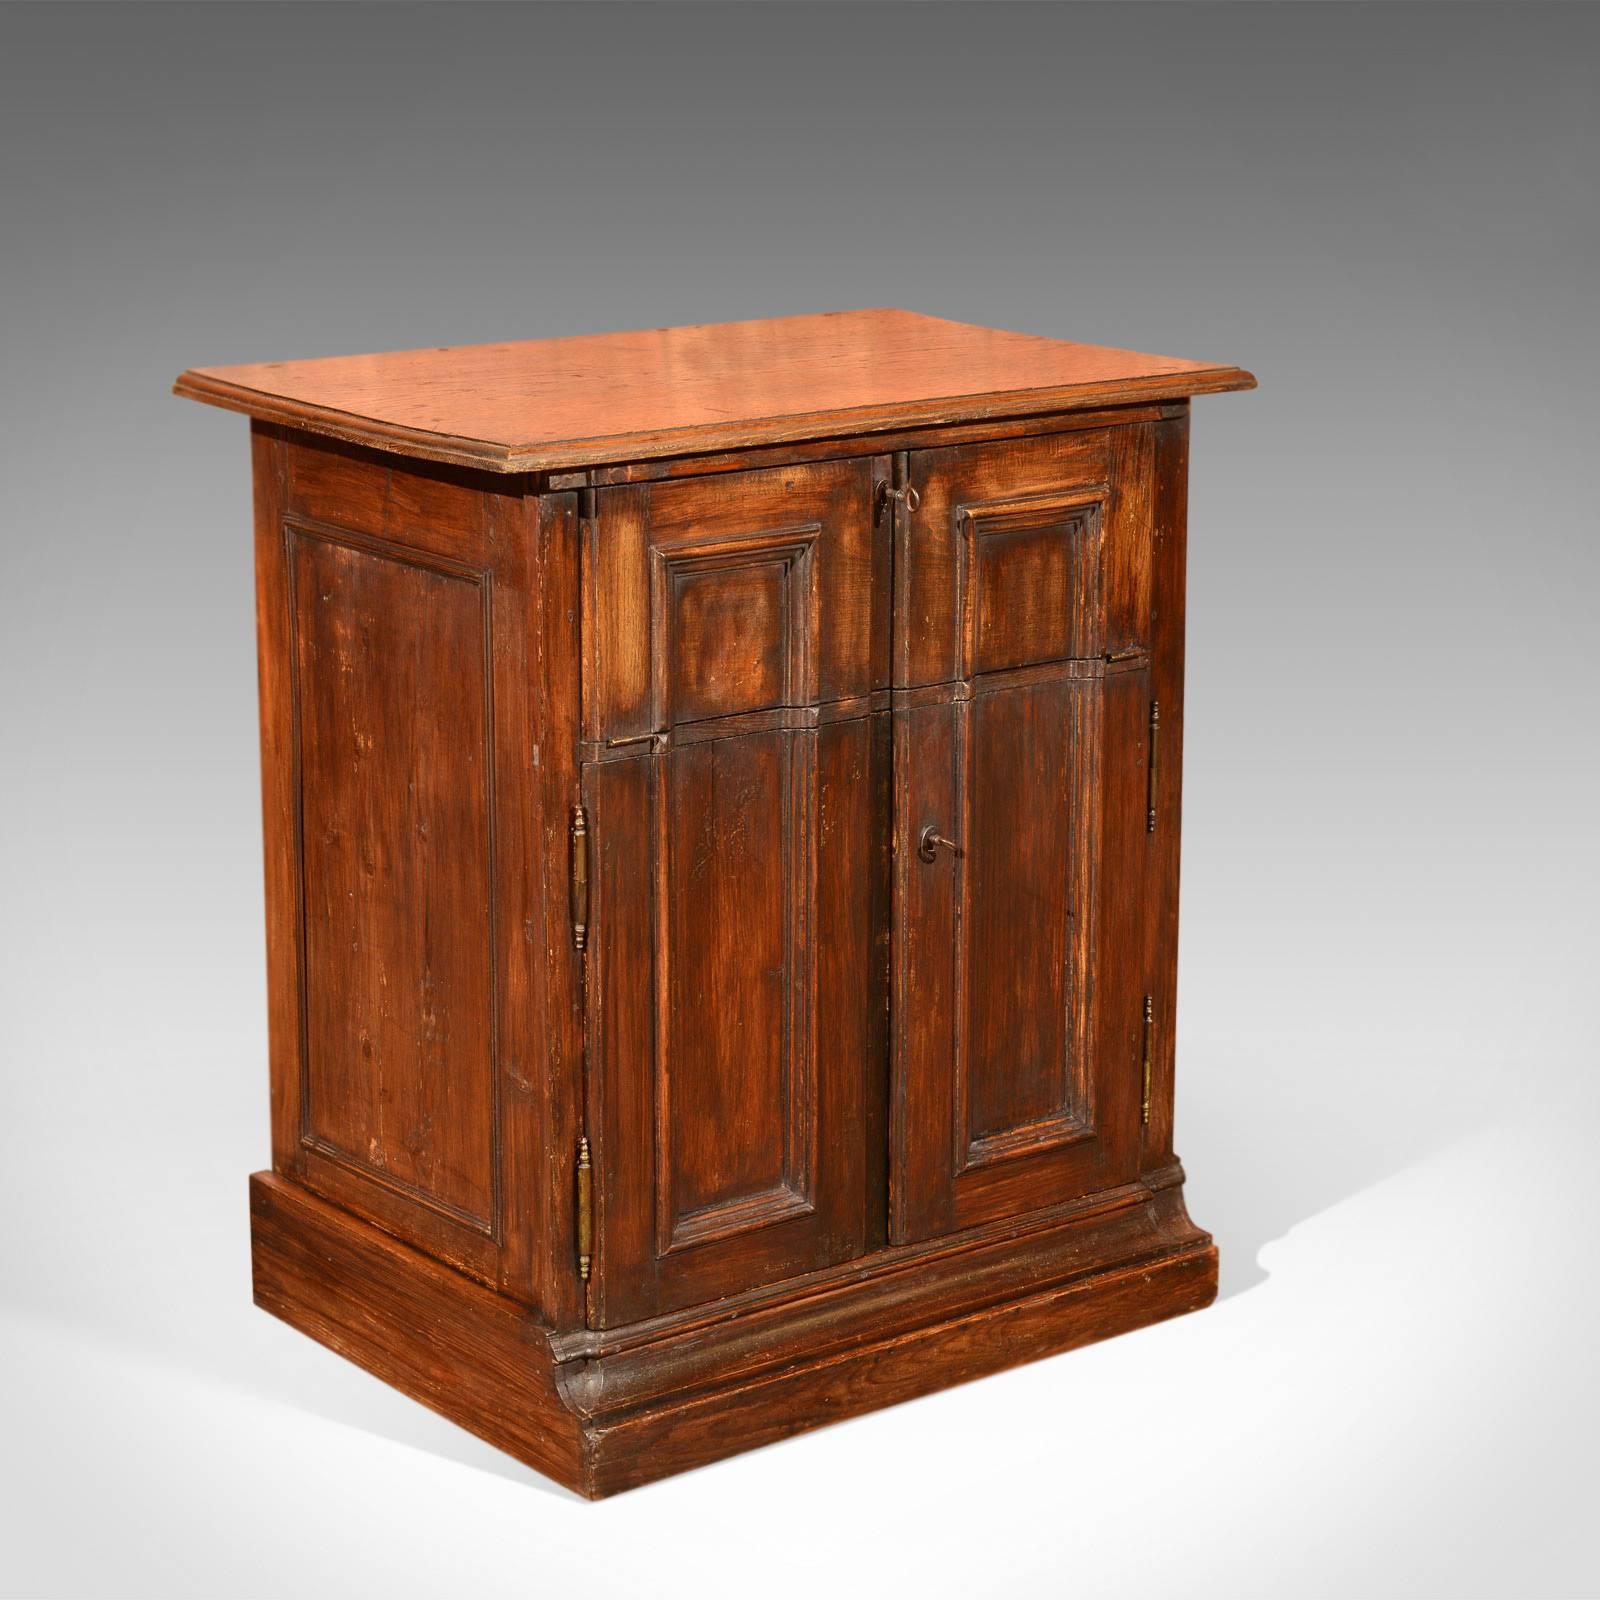 This is an antique, French, oak specimen cabinet dating to circa 1850.

In a desirable country style, this French cabinet is complete with the original working locks and keys. Made in oak and raised on a plinth base the rustic finish is full of